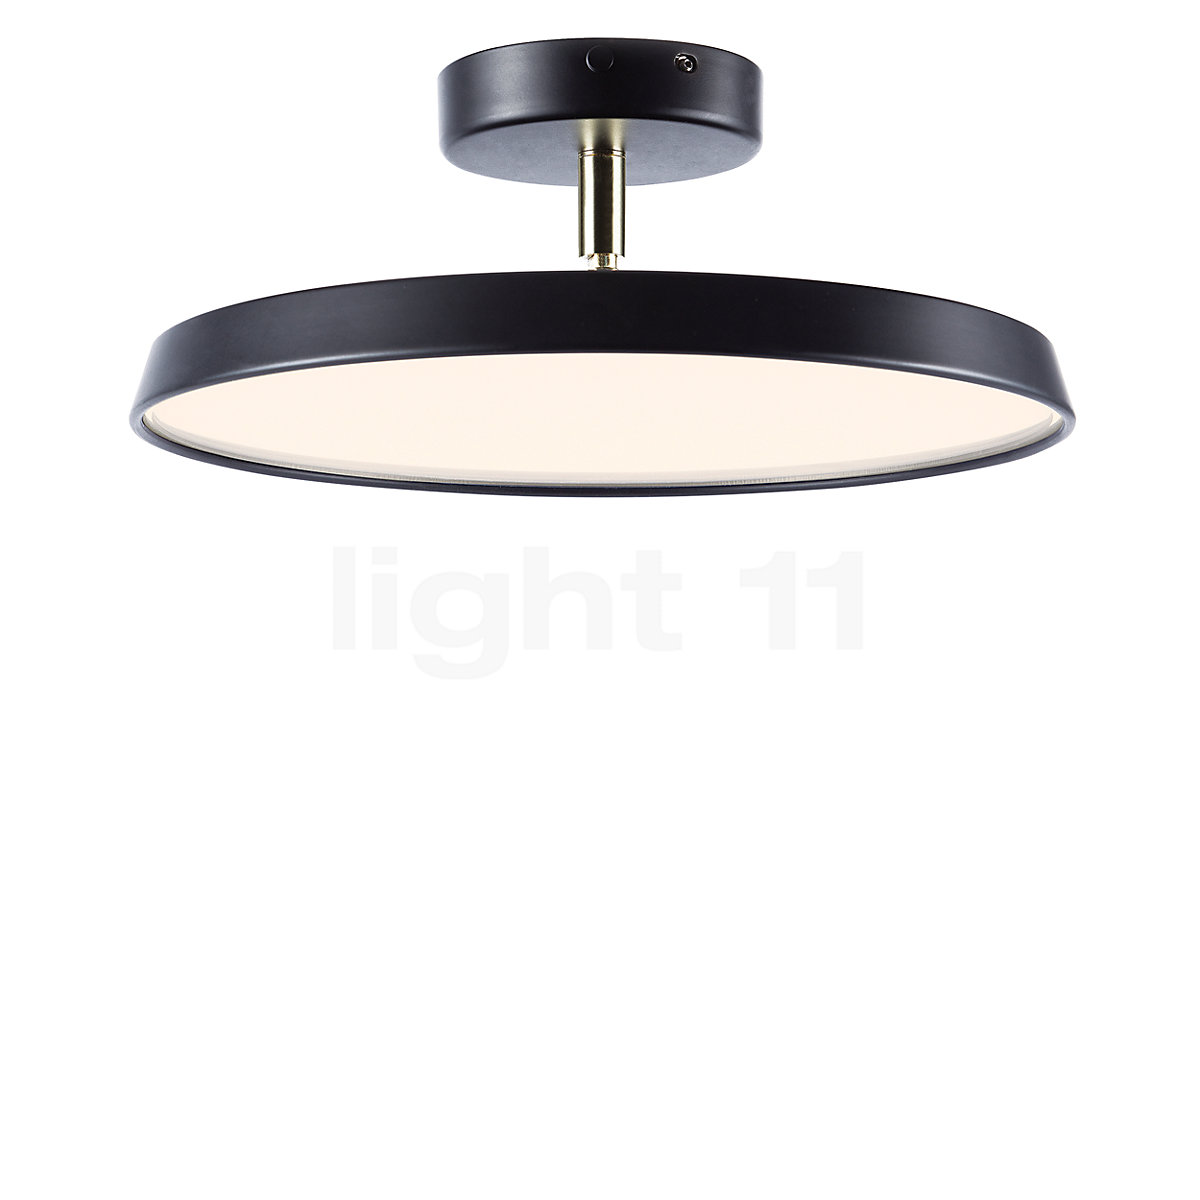 Buy Light the at for Pro Kaito People LED Design Ceiling